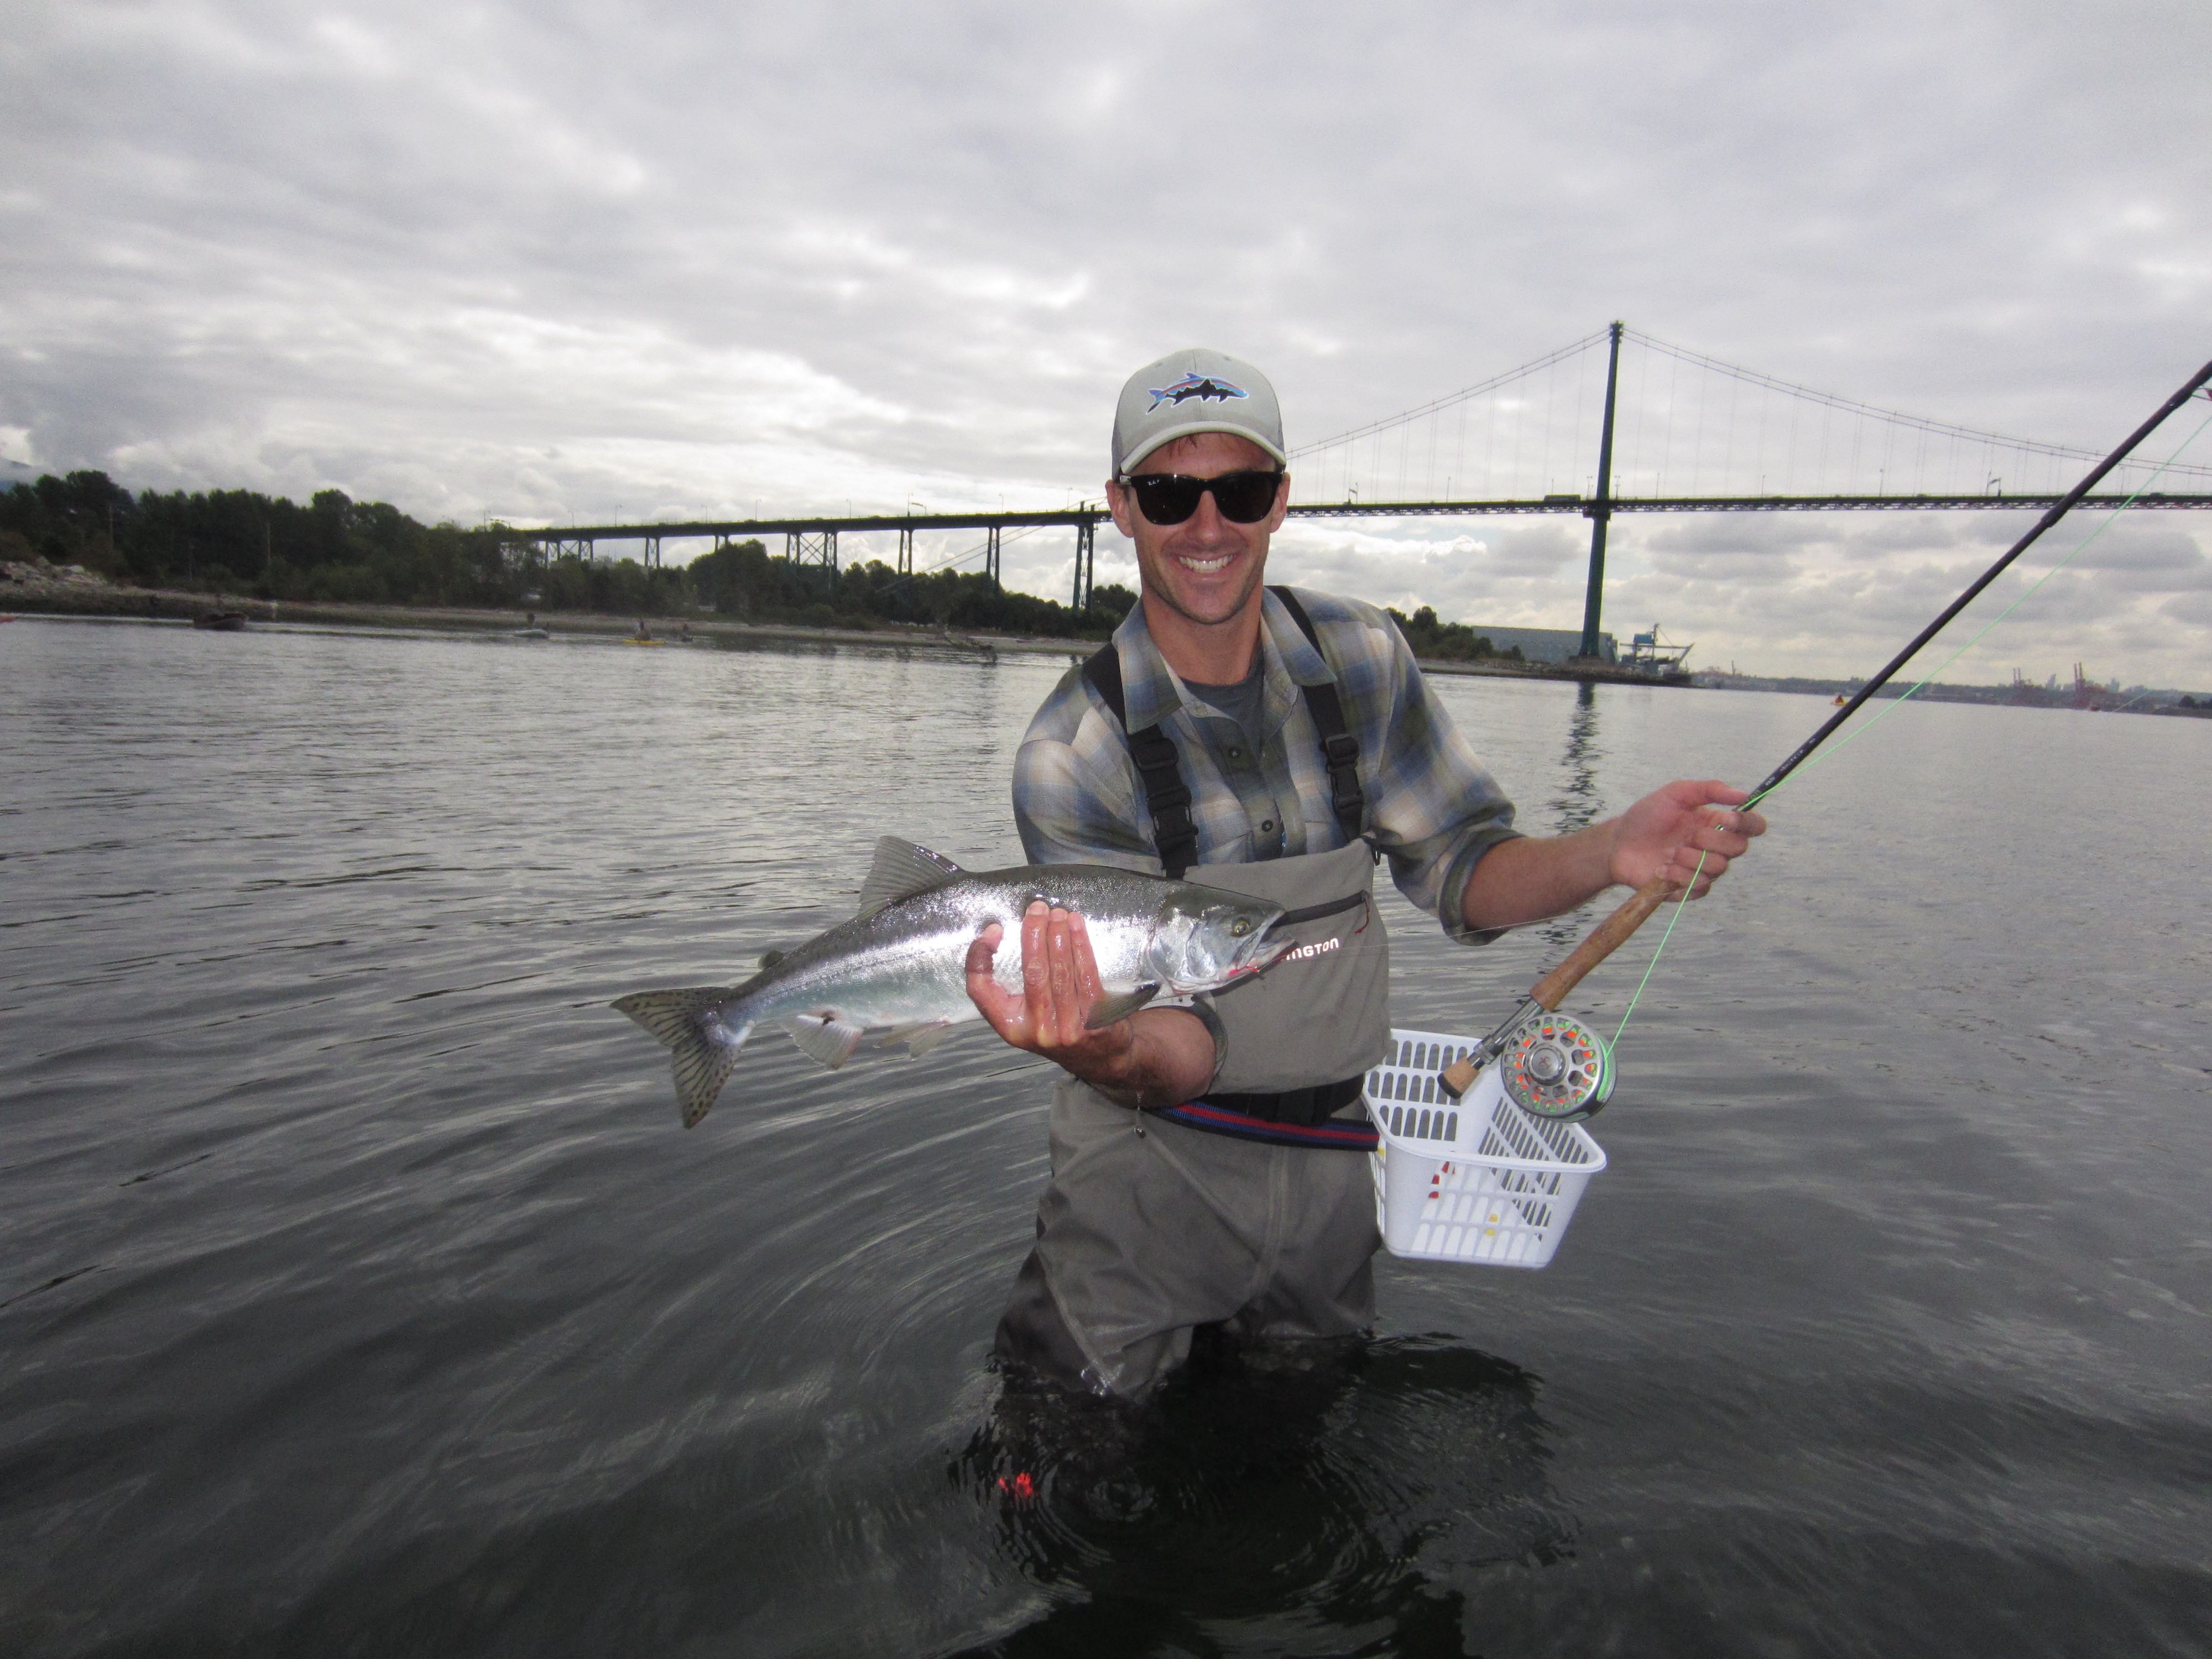 Vancouver Saltwater Report: July 31, 2015 - Vancouver Salmon Fishing